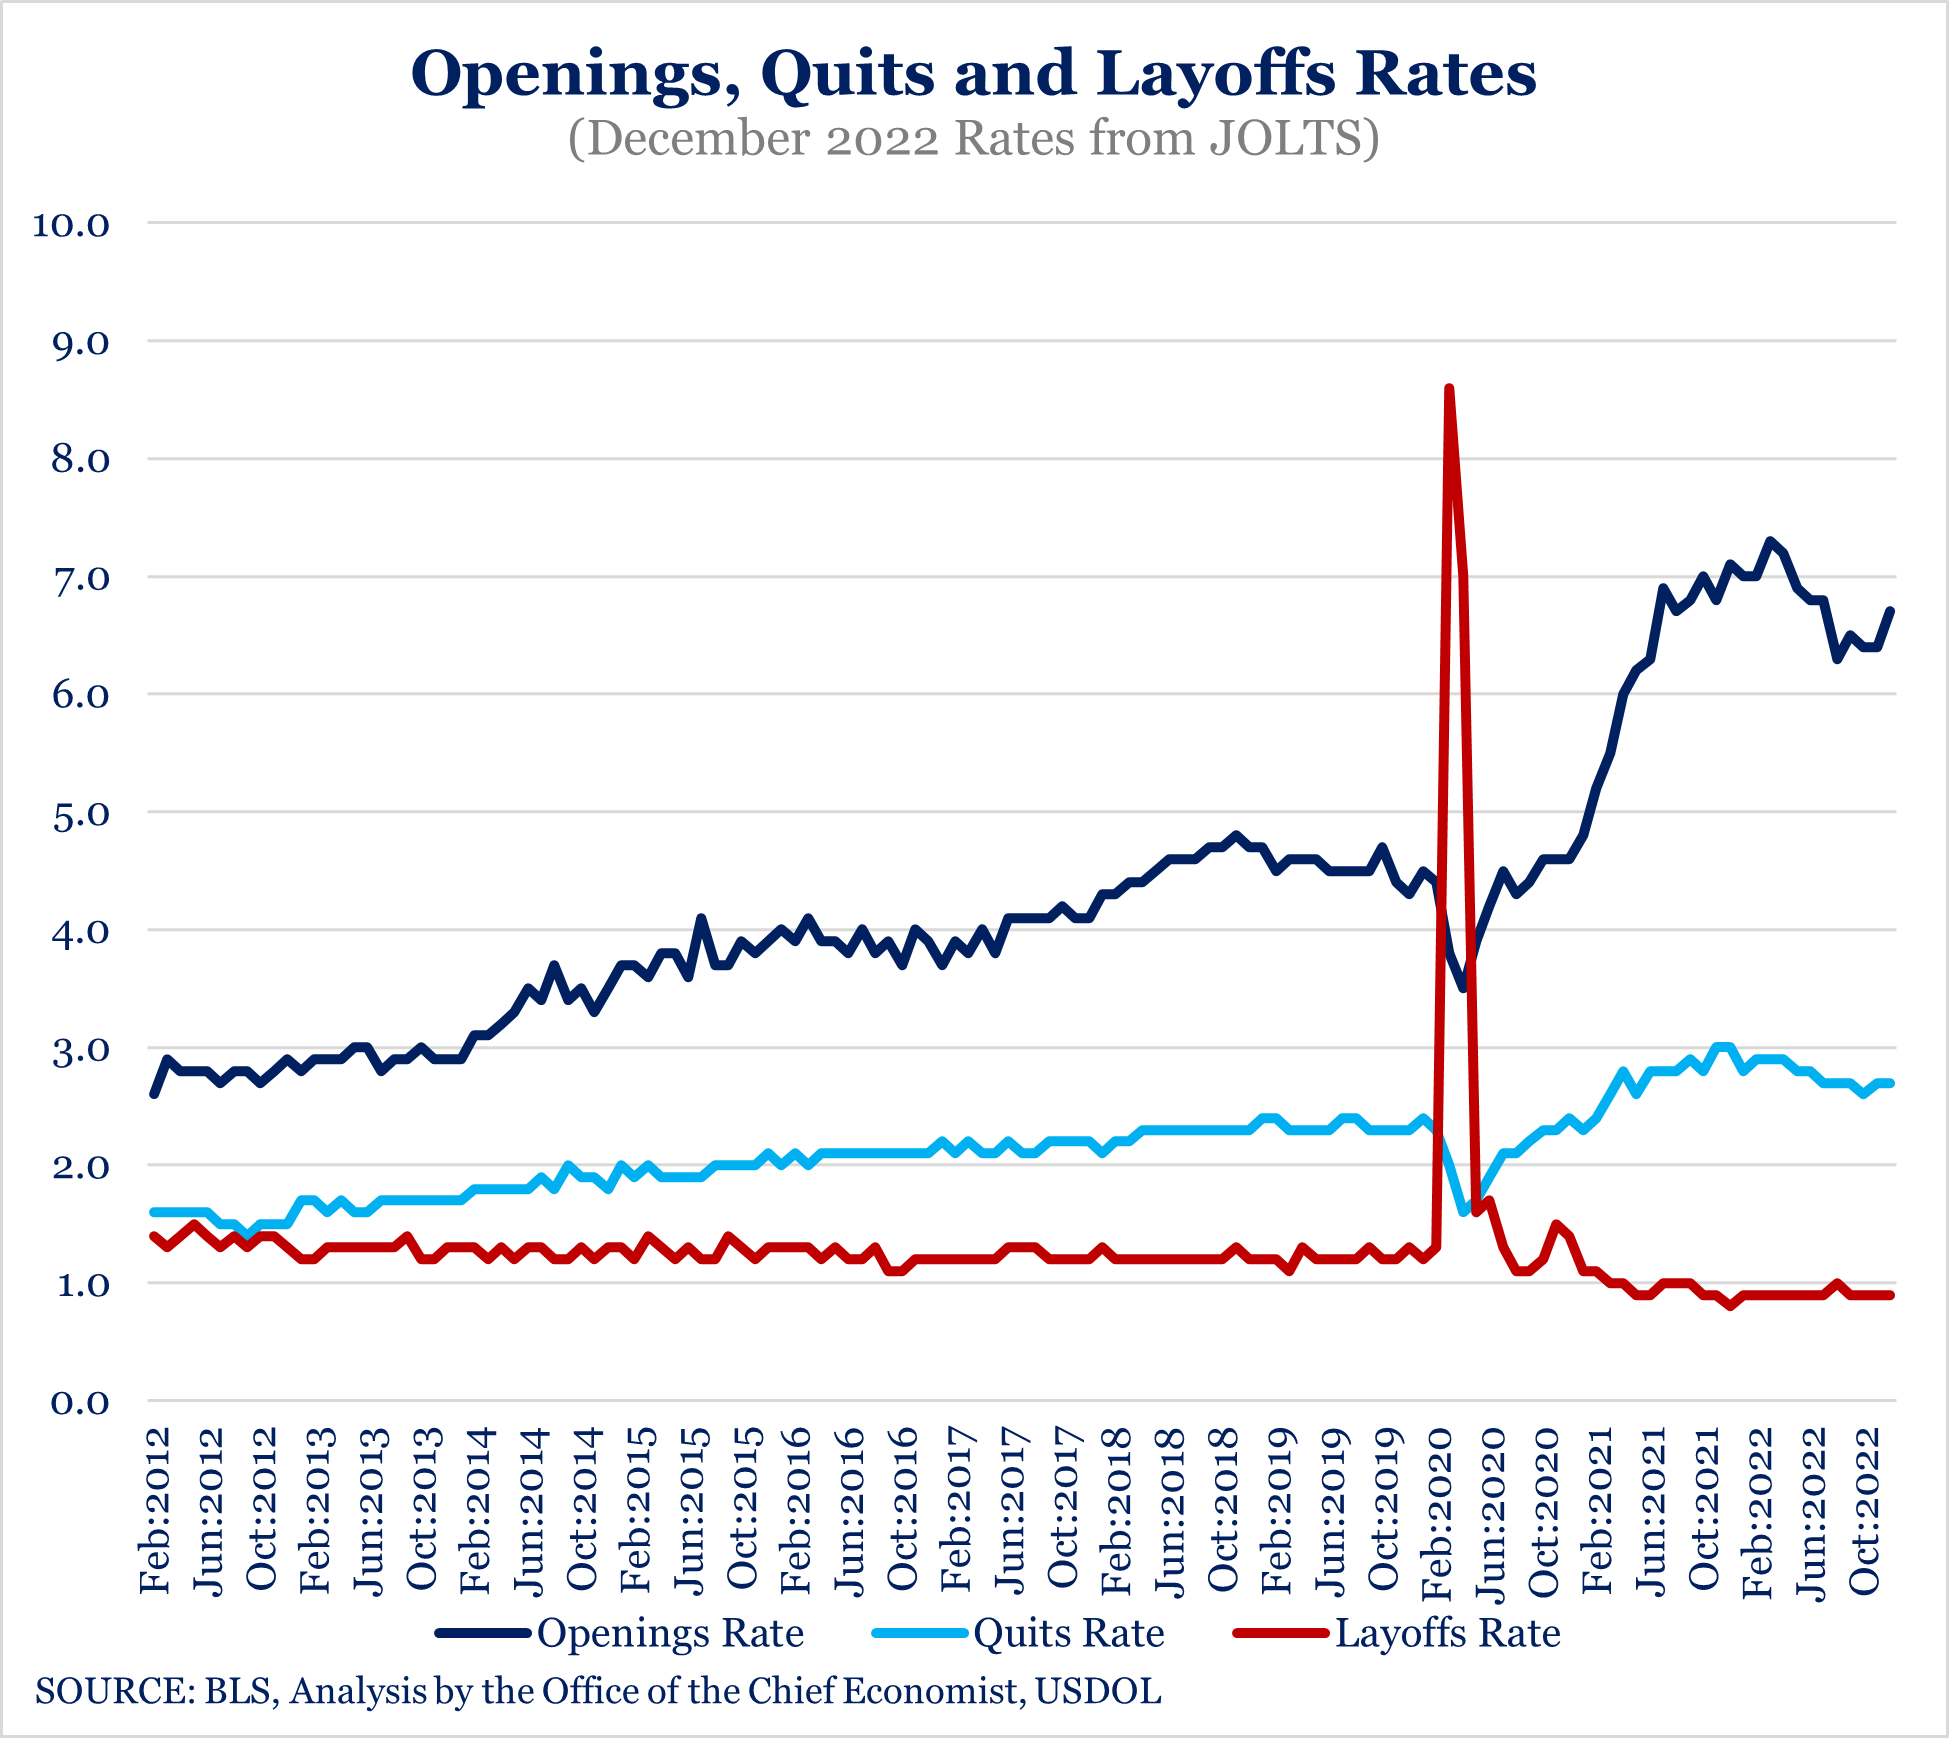 Openings, Quits & Layoff Rates | December 2022 Rates from JOLTS